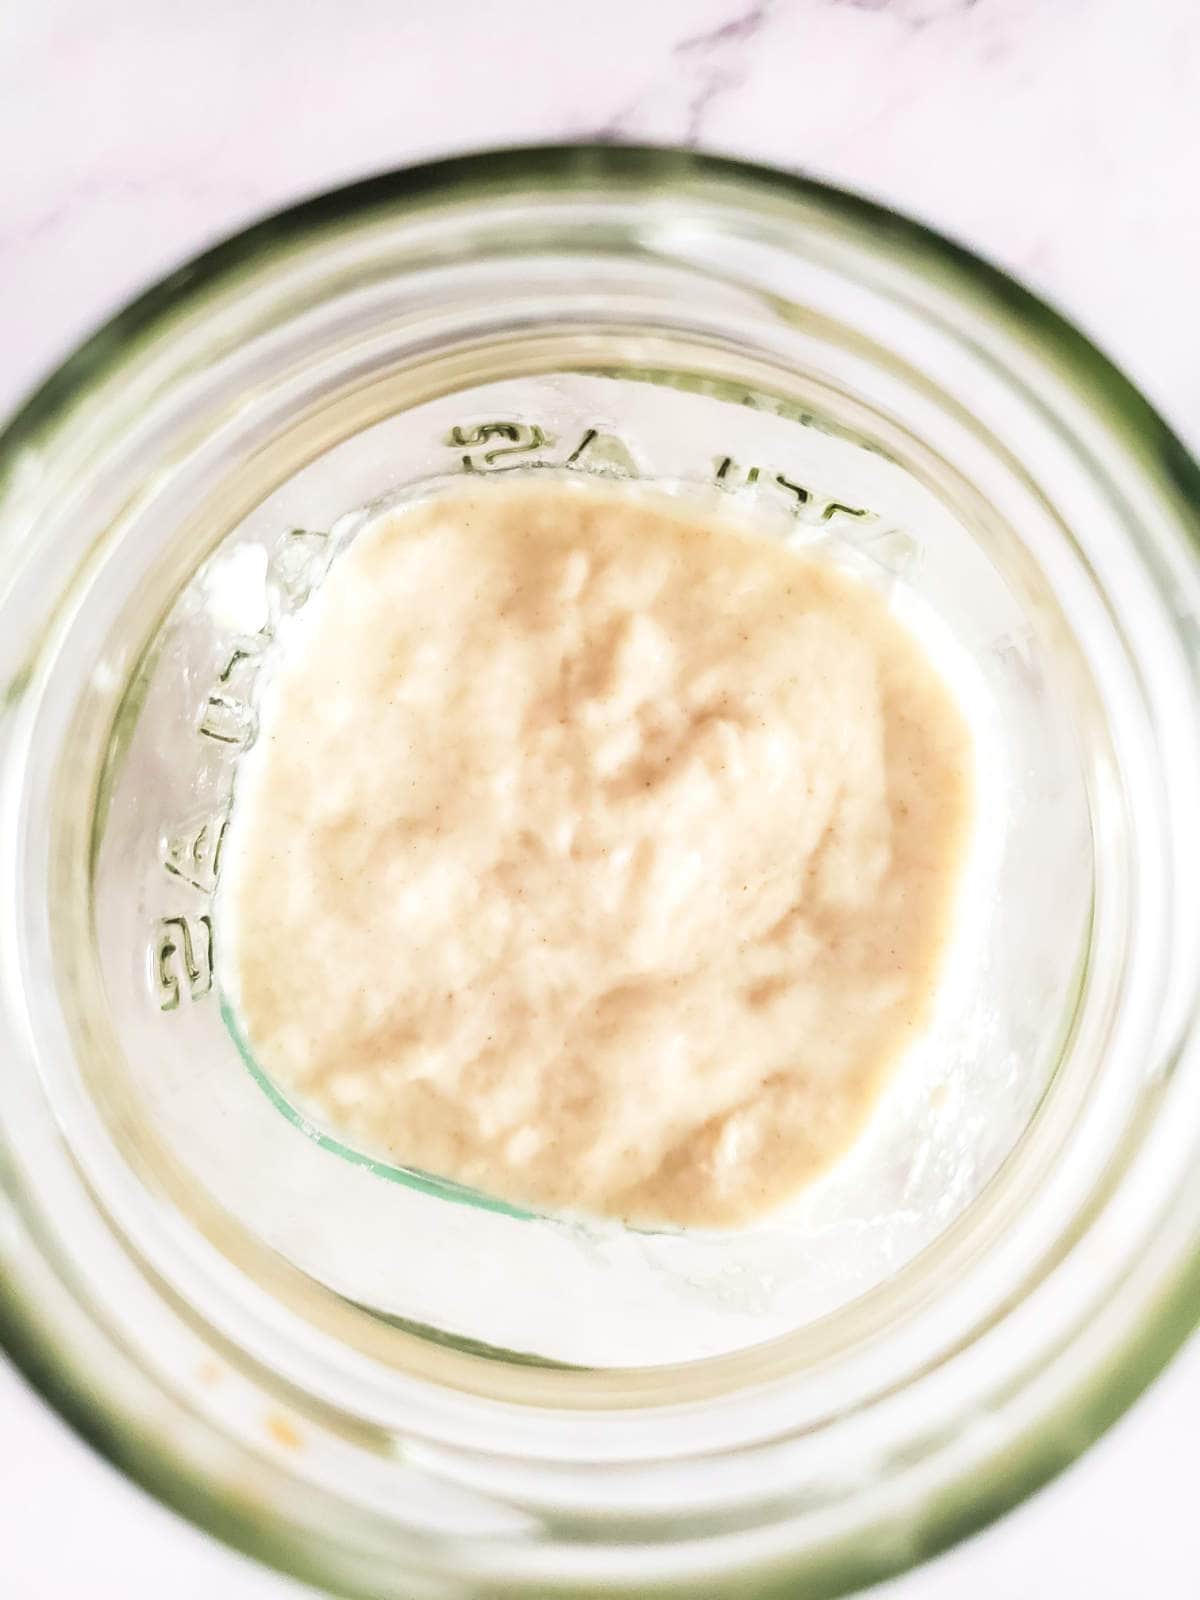 flour and water mixture in a jar.